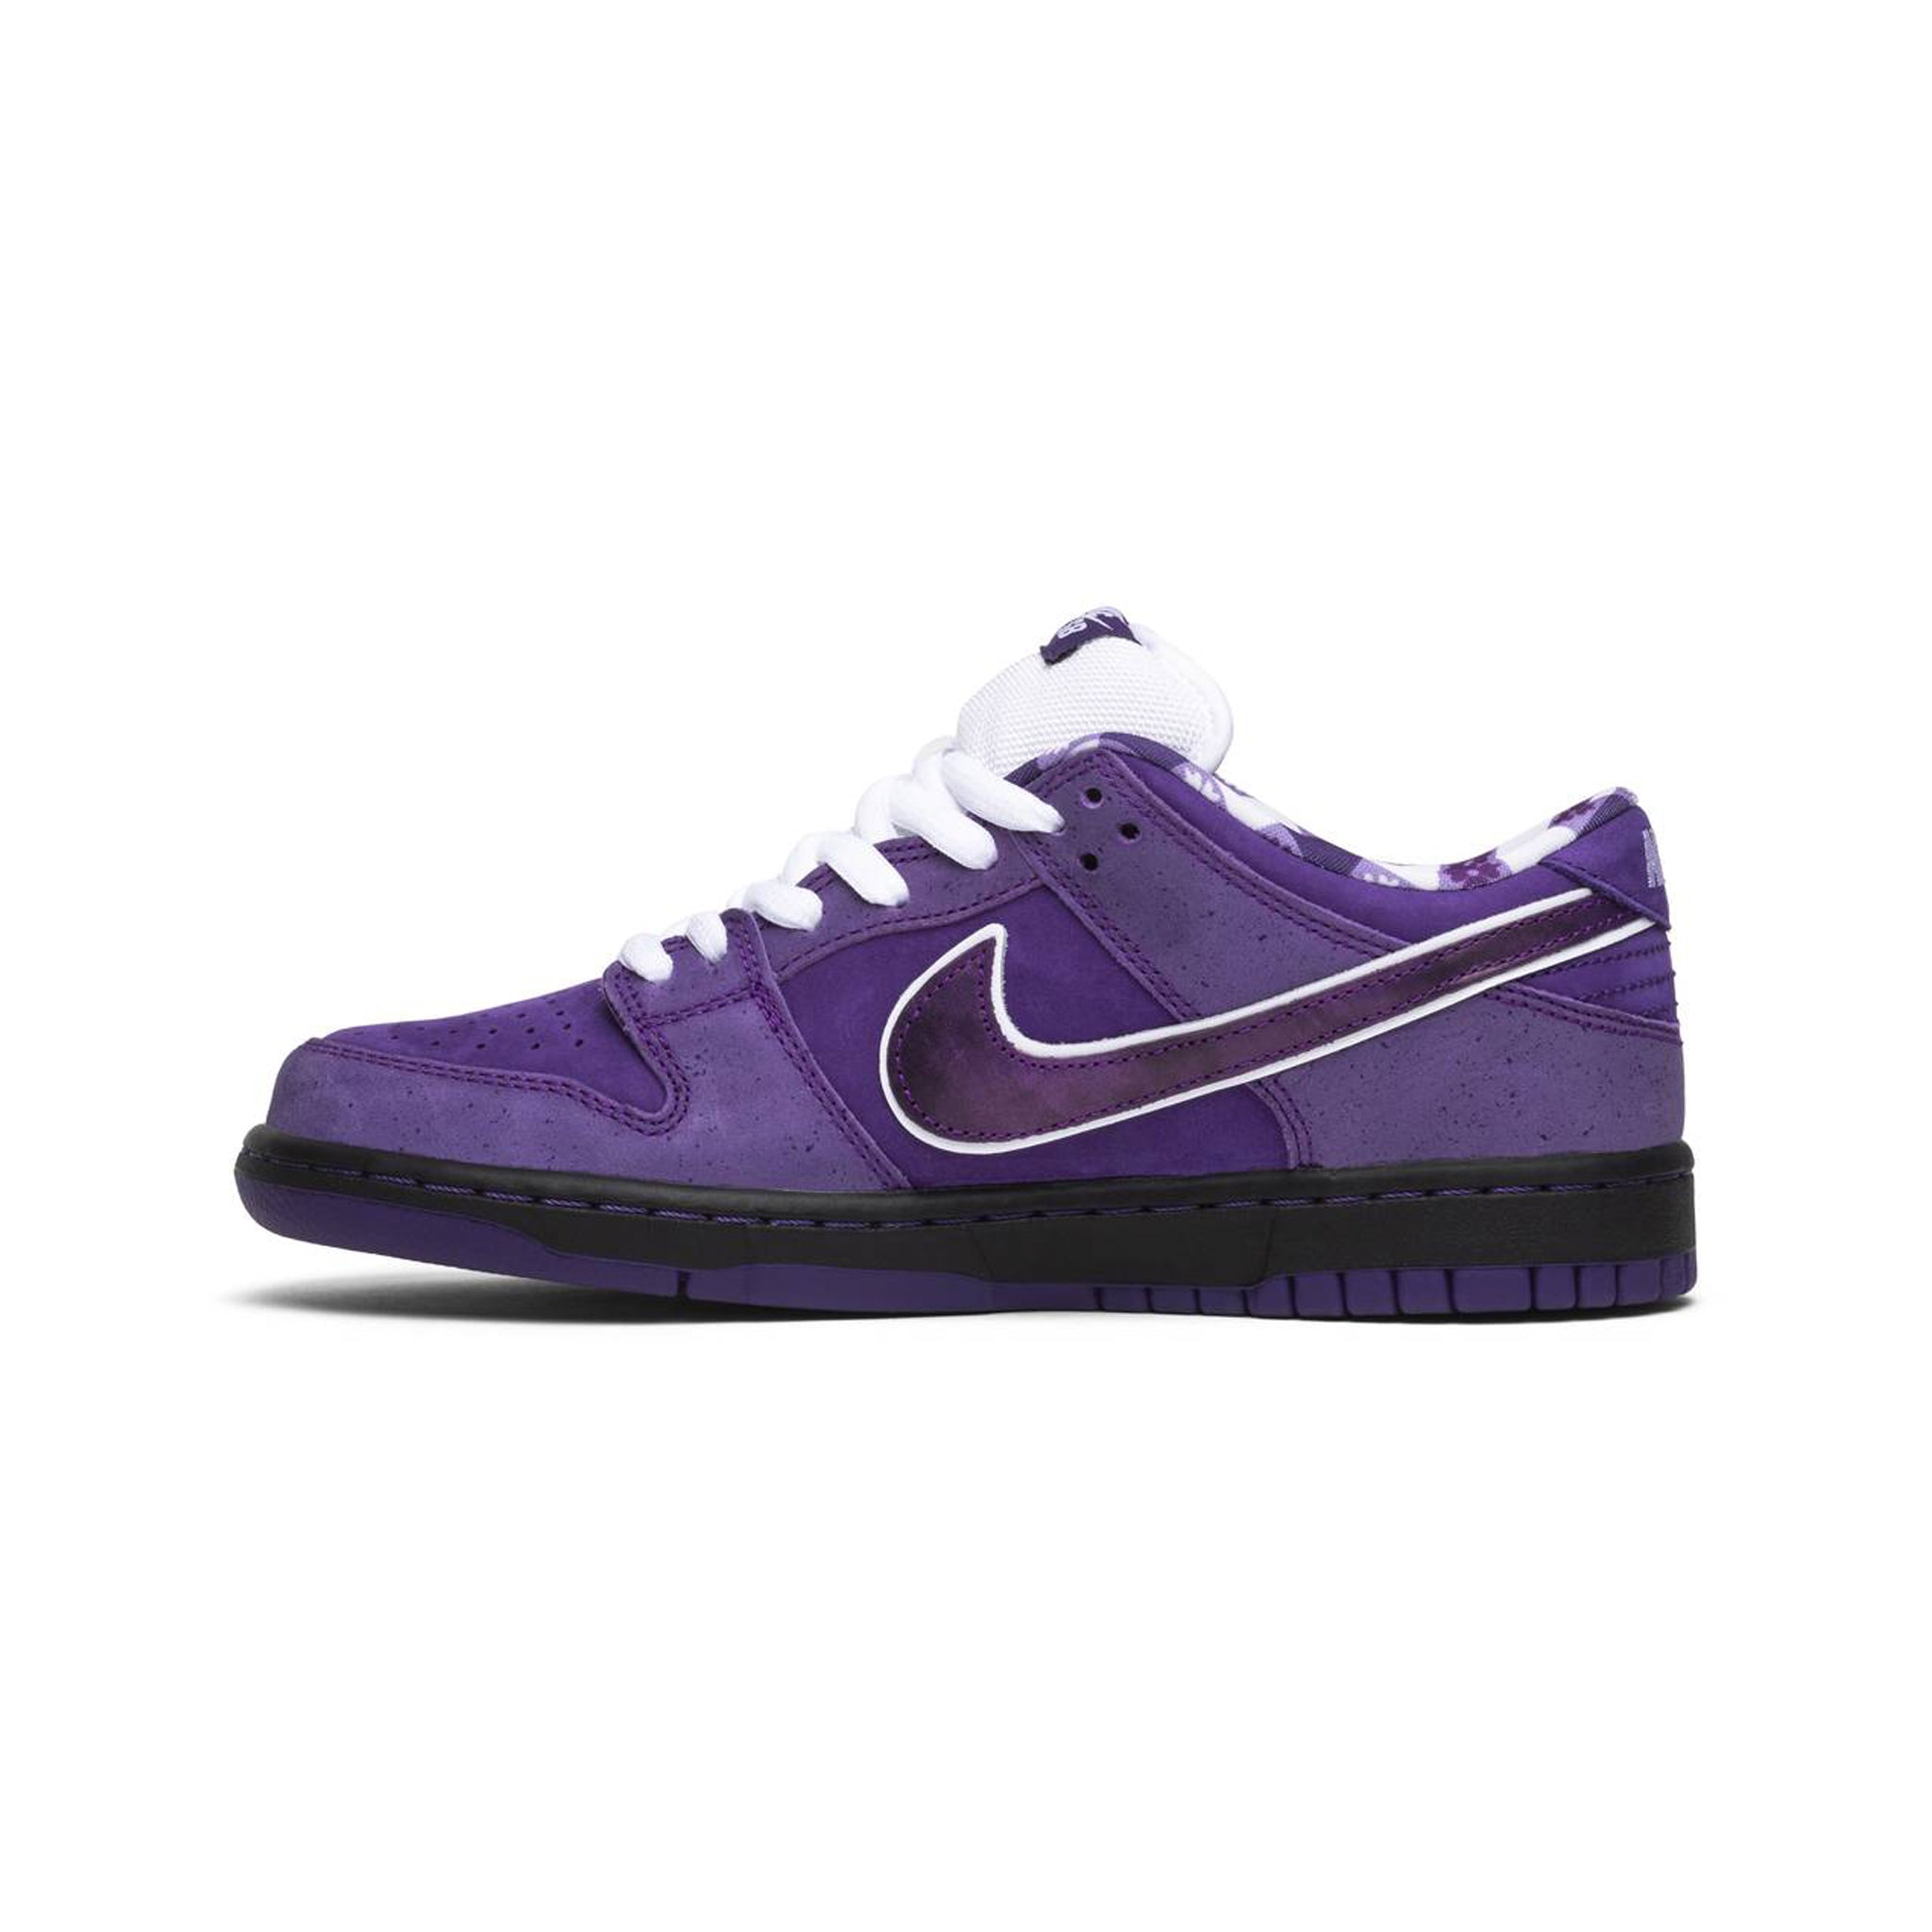 NIKE SB DUNK LOW CONCEPTS PURPLE LOBSTER